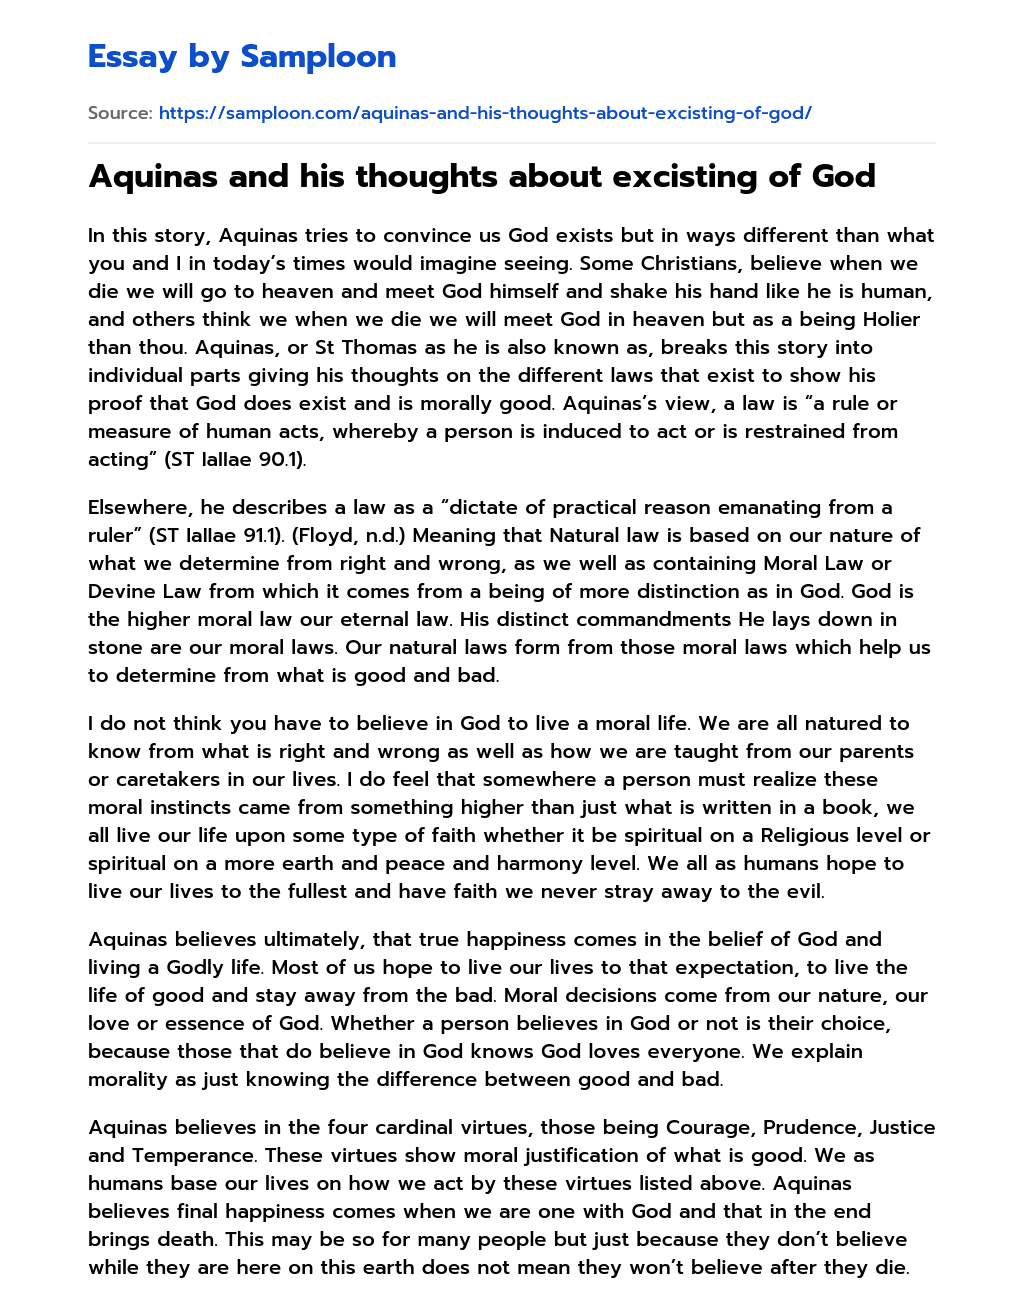 Aquinas and his thoughts about excisting of God essay